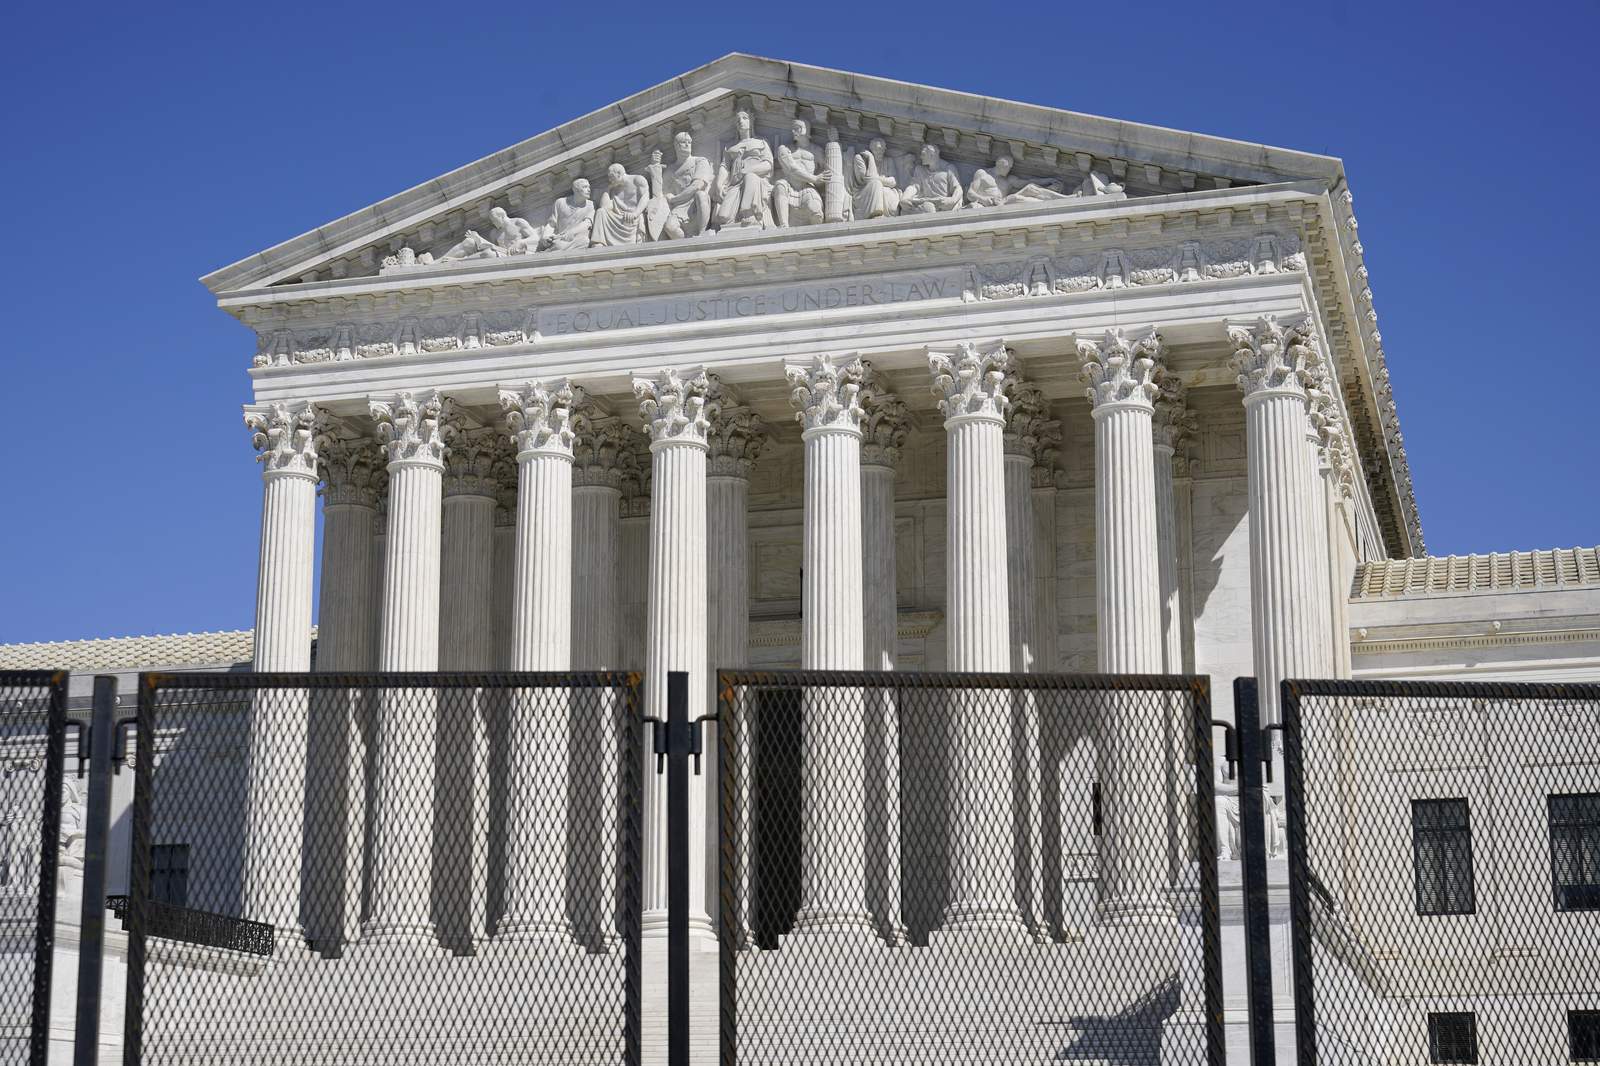 Group to study more justices, term limits for Supreme Court